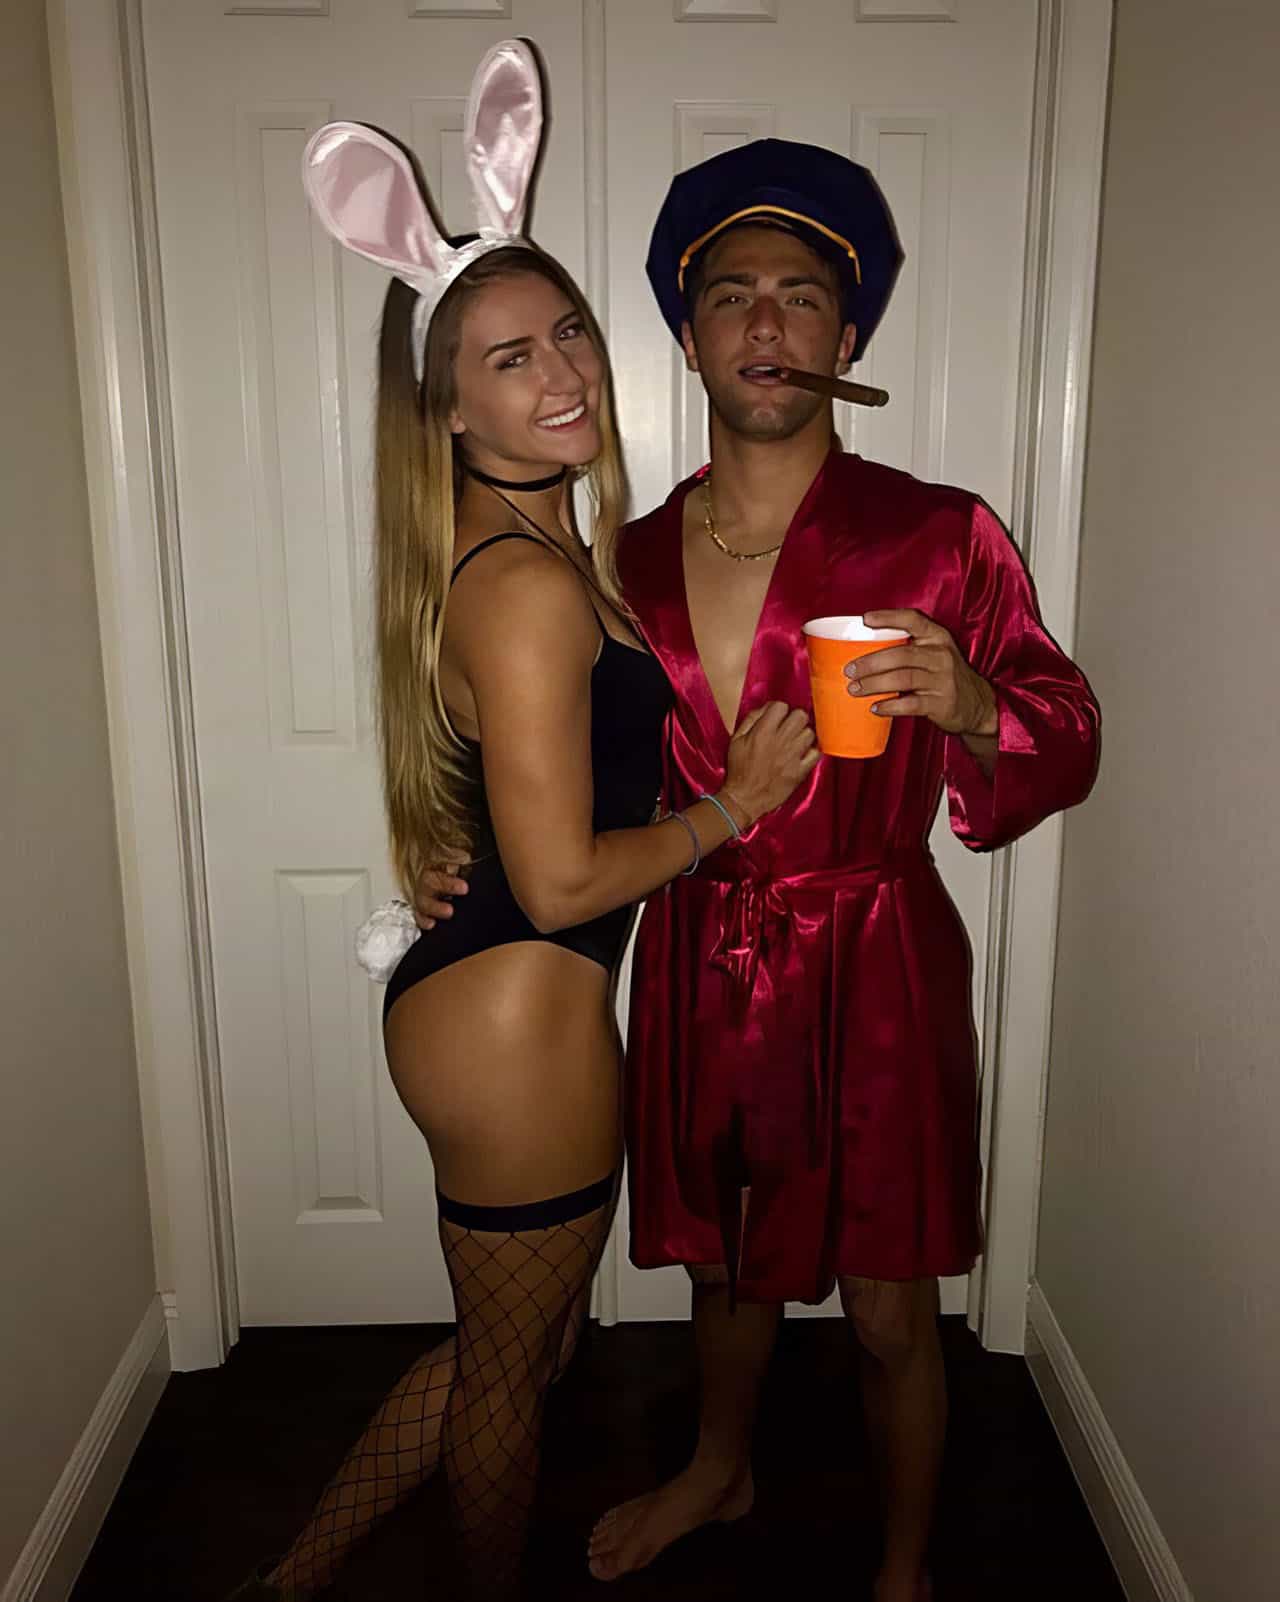 Sexy Couples Halloween Costume Ideas From Barbie And Ken To Disney Duos 7941